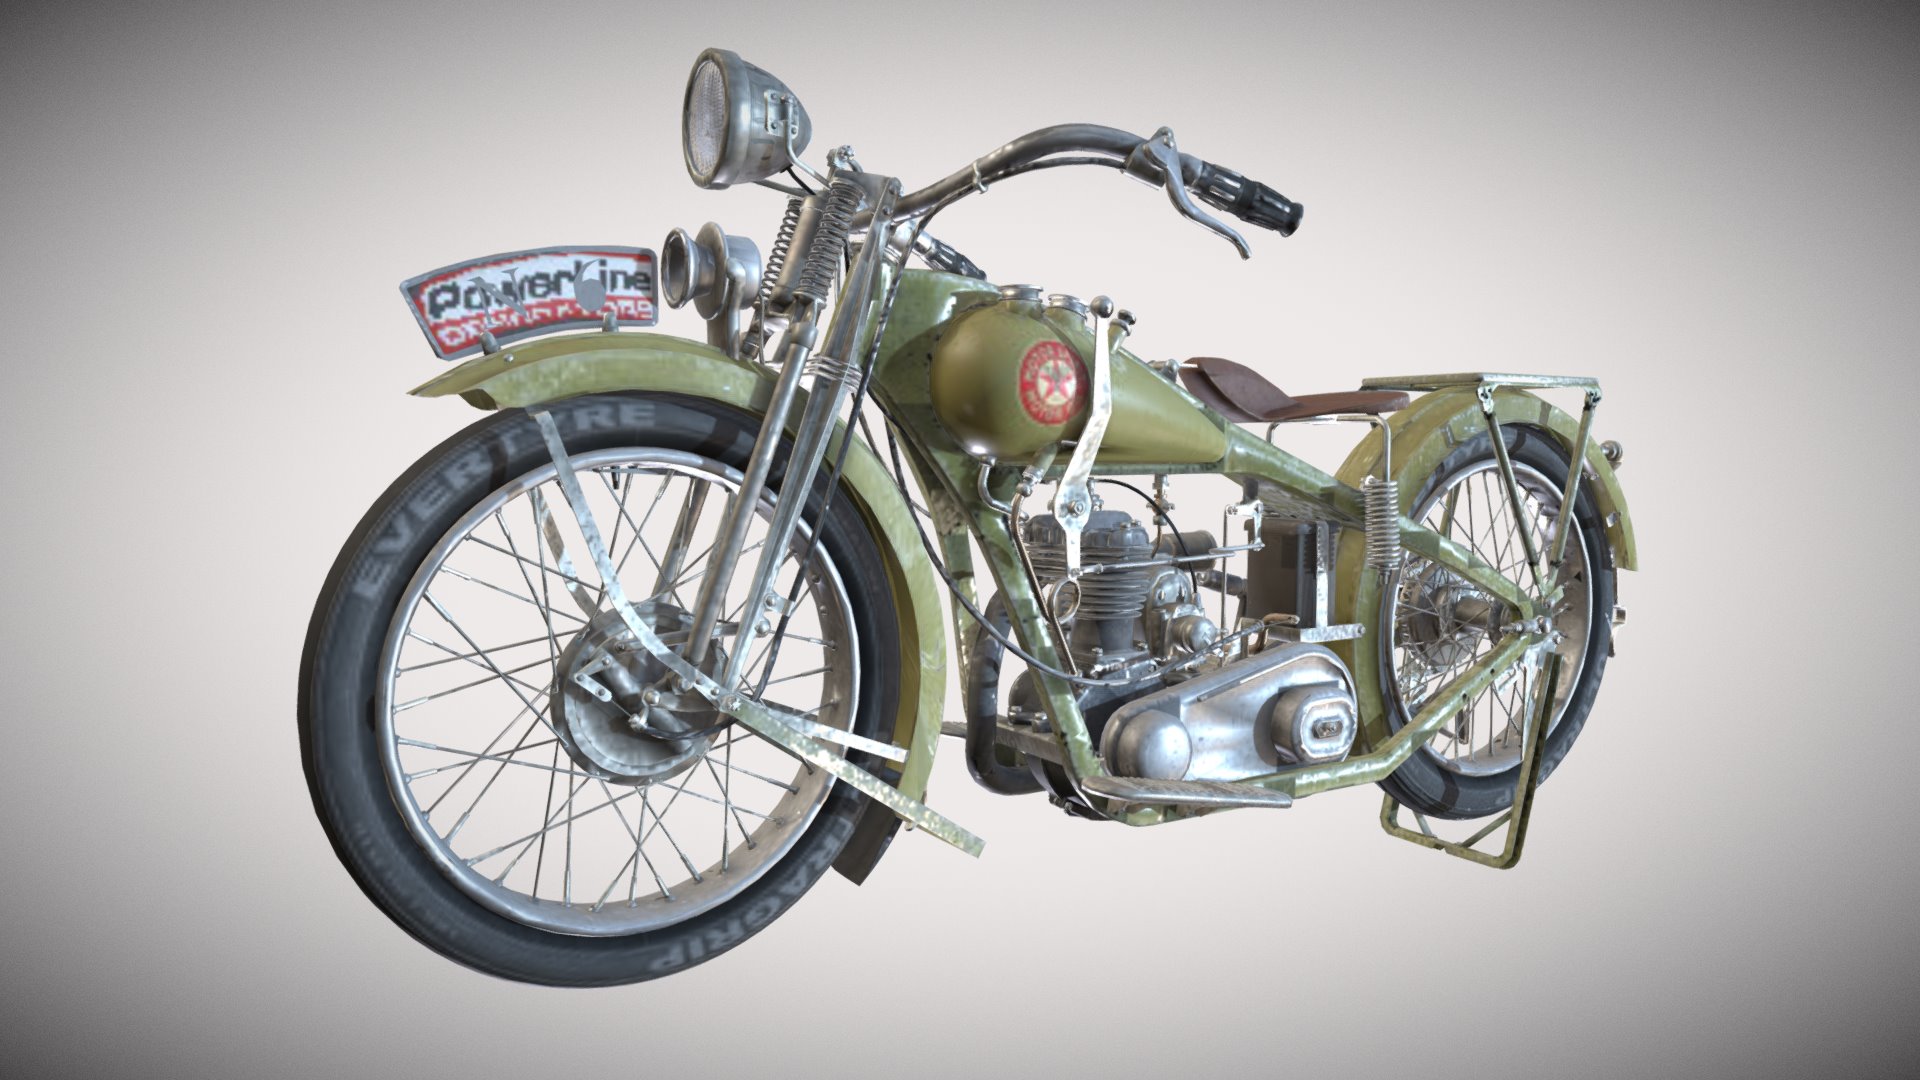 3D model Old Motorbike - This is a 3D model of the Old Motorbike. The 3D model is about a green and gold motorcycle.